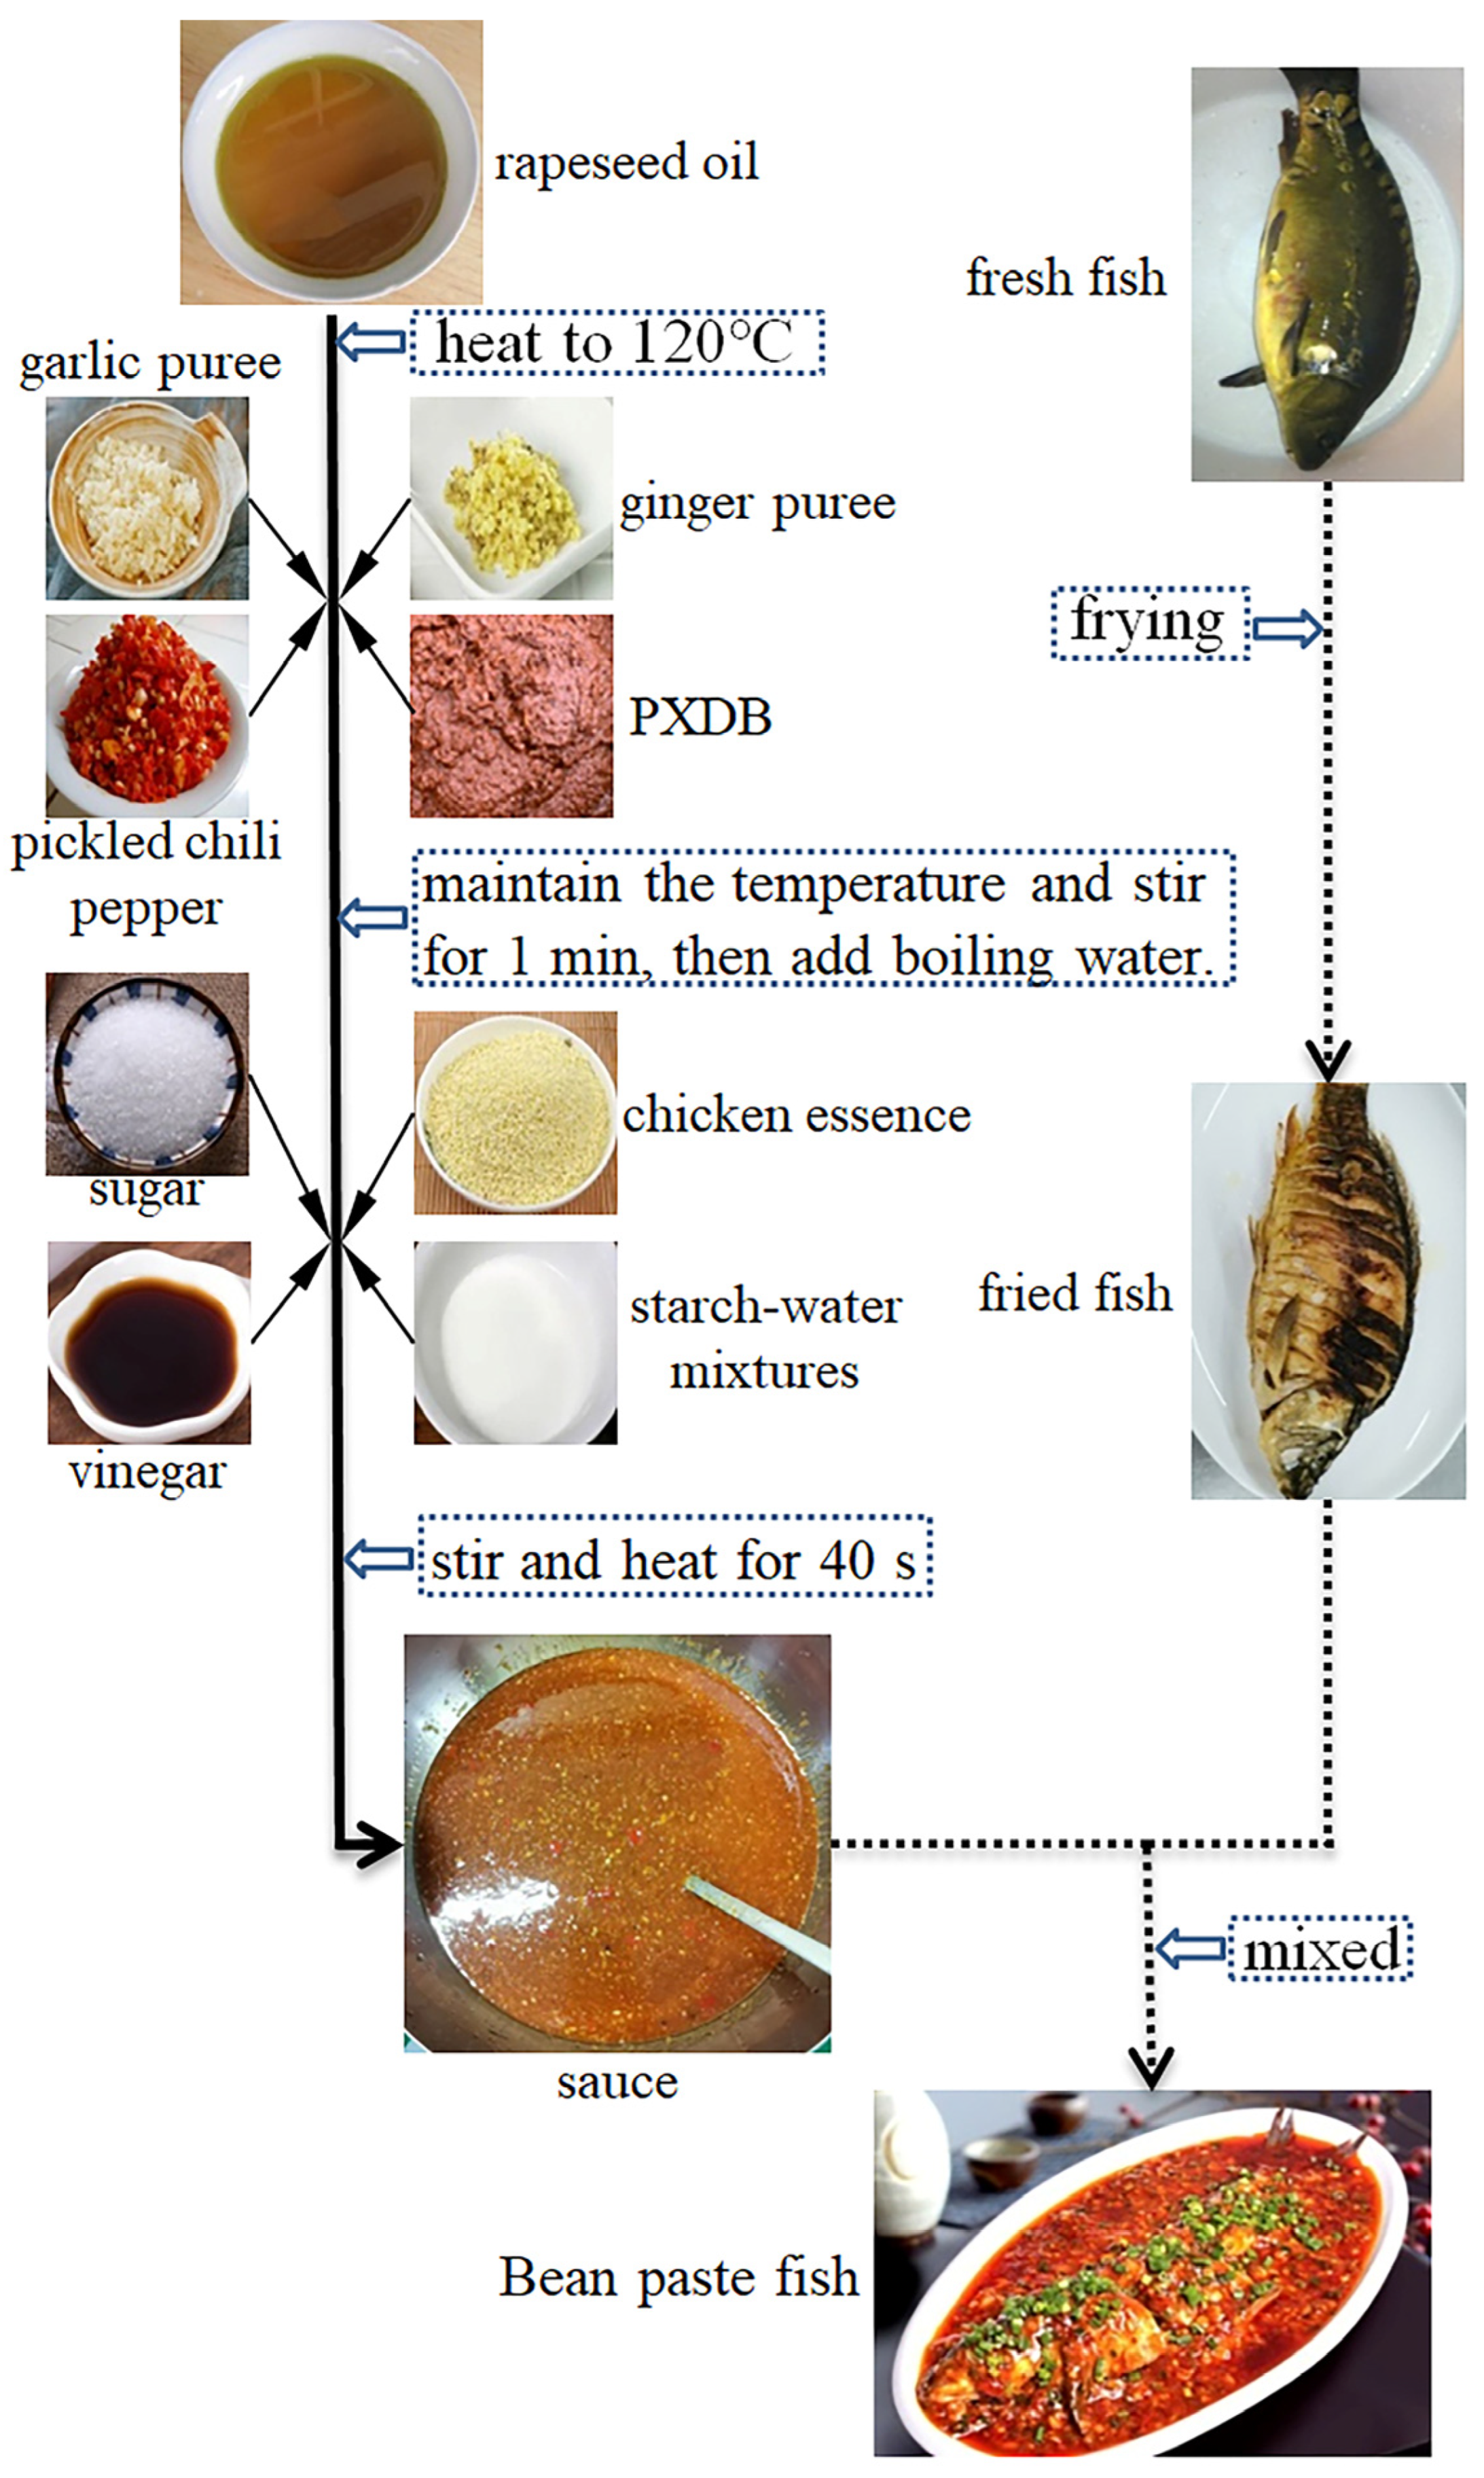 Foods | Free Full-Text | Sensory and Volatile Compounds Characteristics of  the Sauce in Bean Paste Fish Treated with Ultra-High-Pressure and  Representative Thermal Sterilization